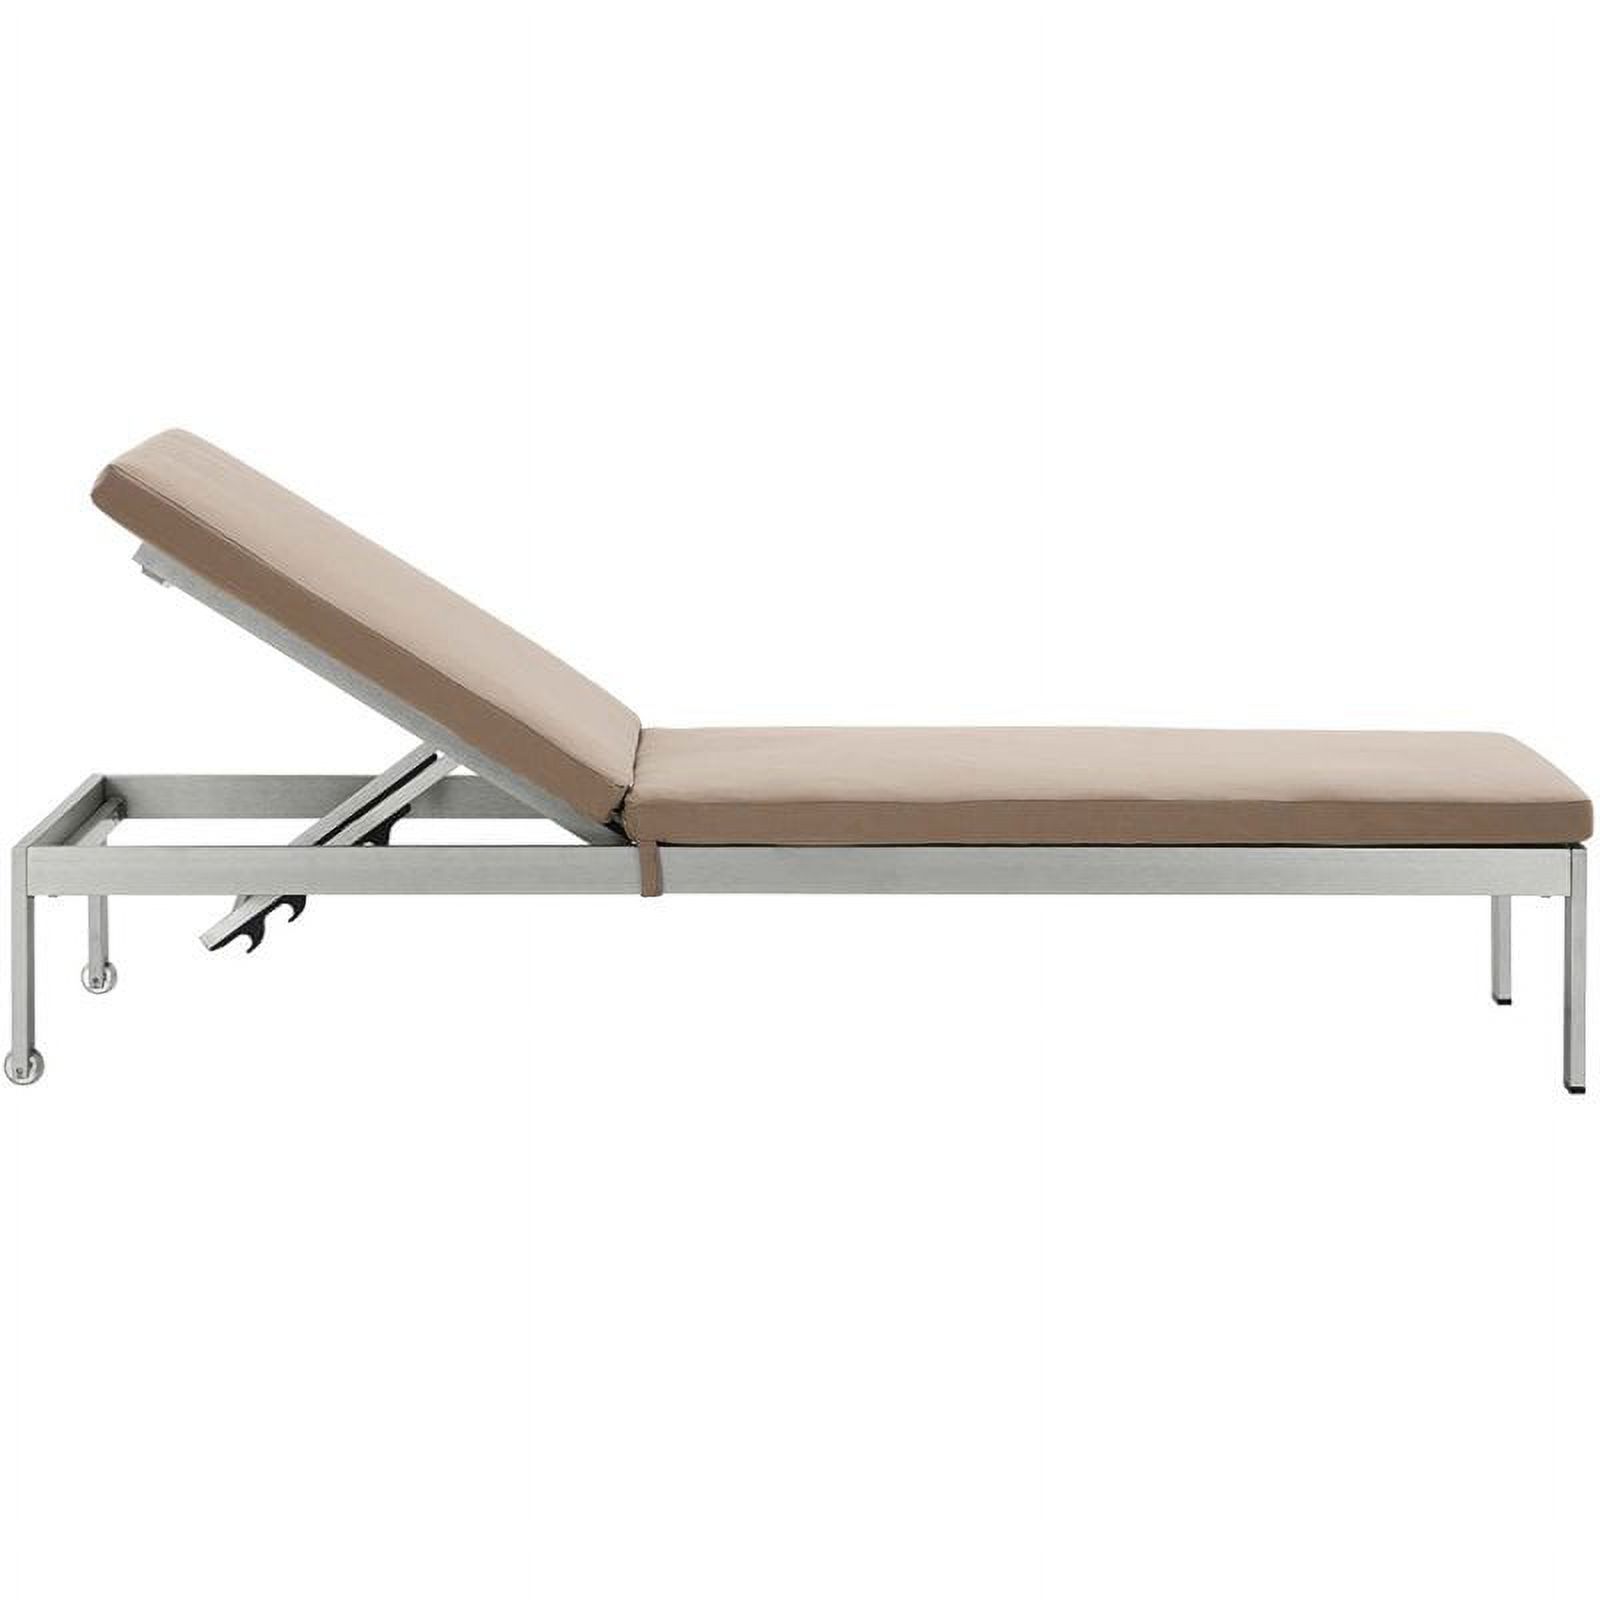 Pemberly Row  Plastic Wood Reclining Patio Chaise Lounge in Silver and Mocha - image 3 of 4